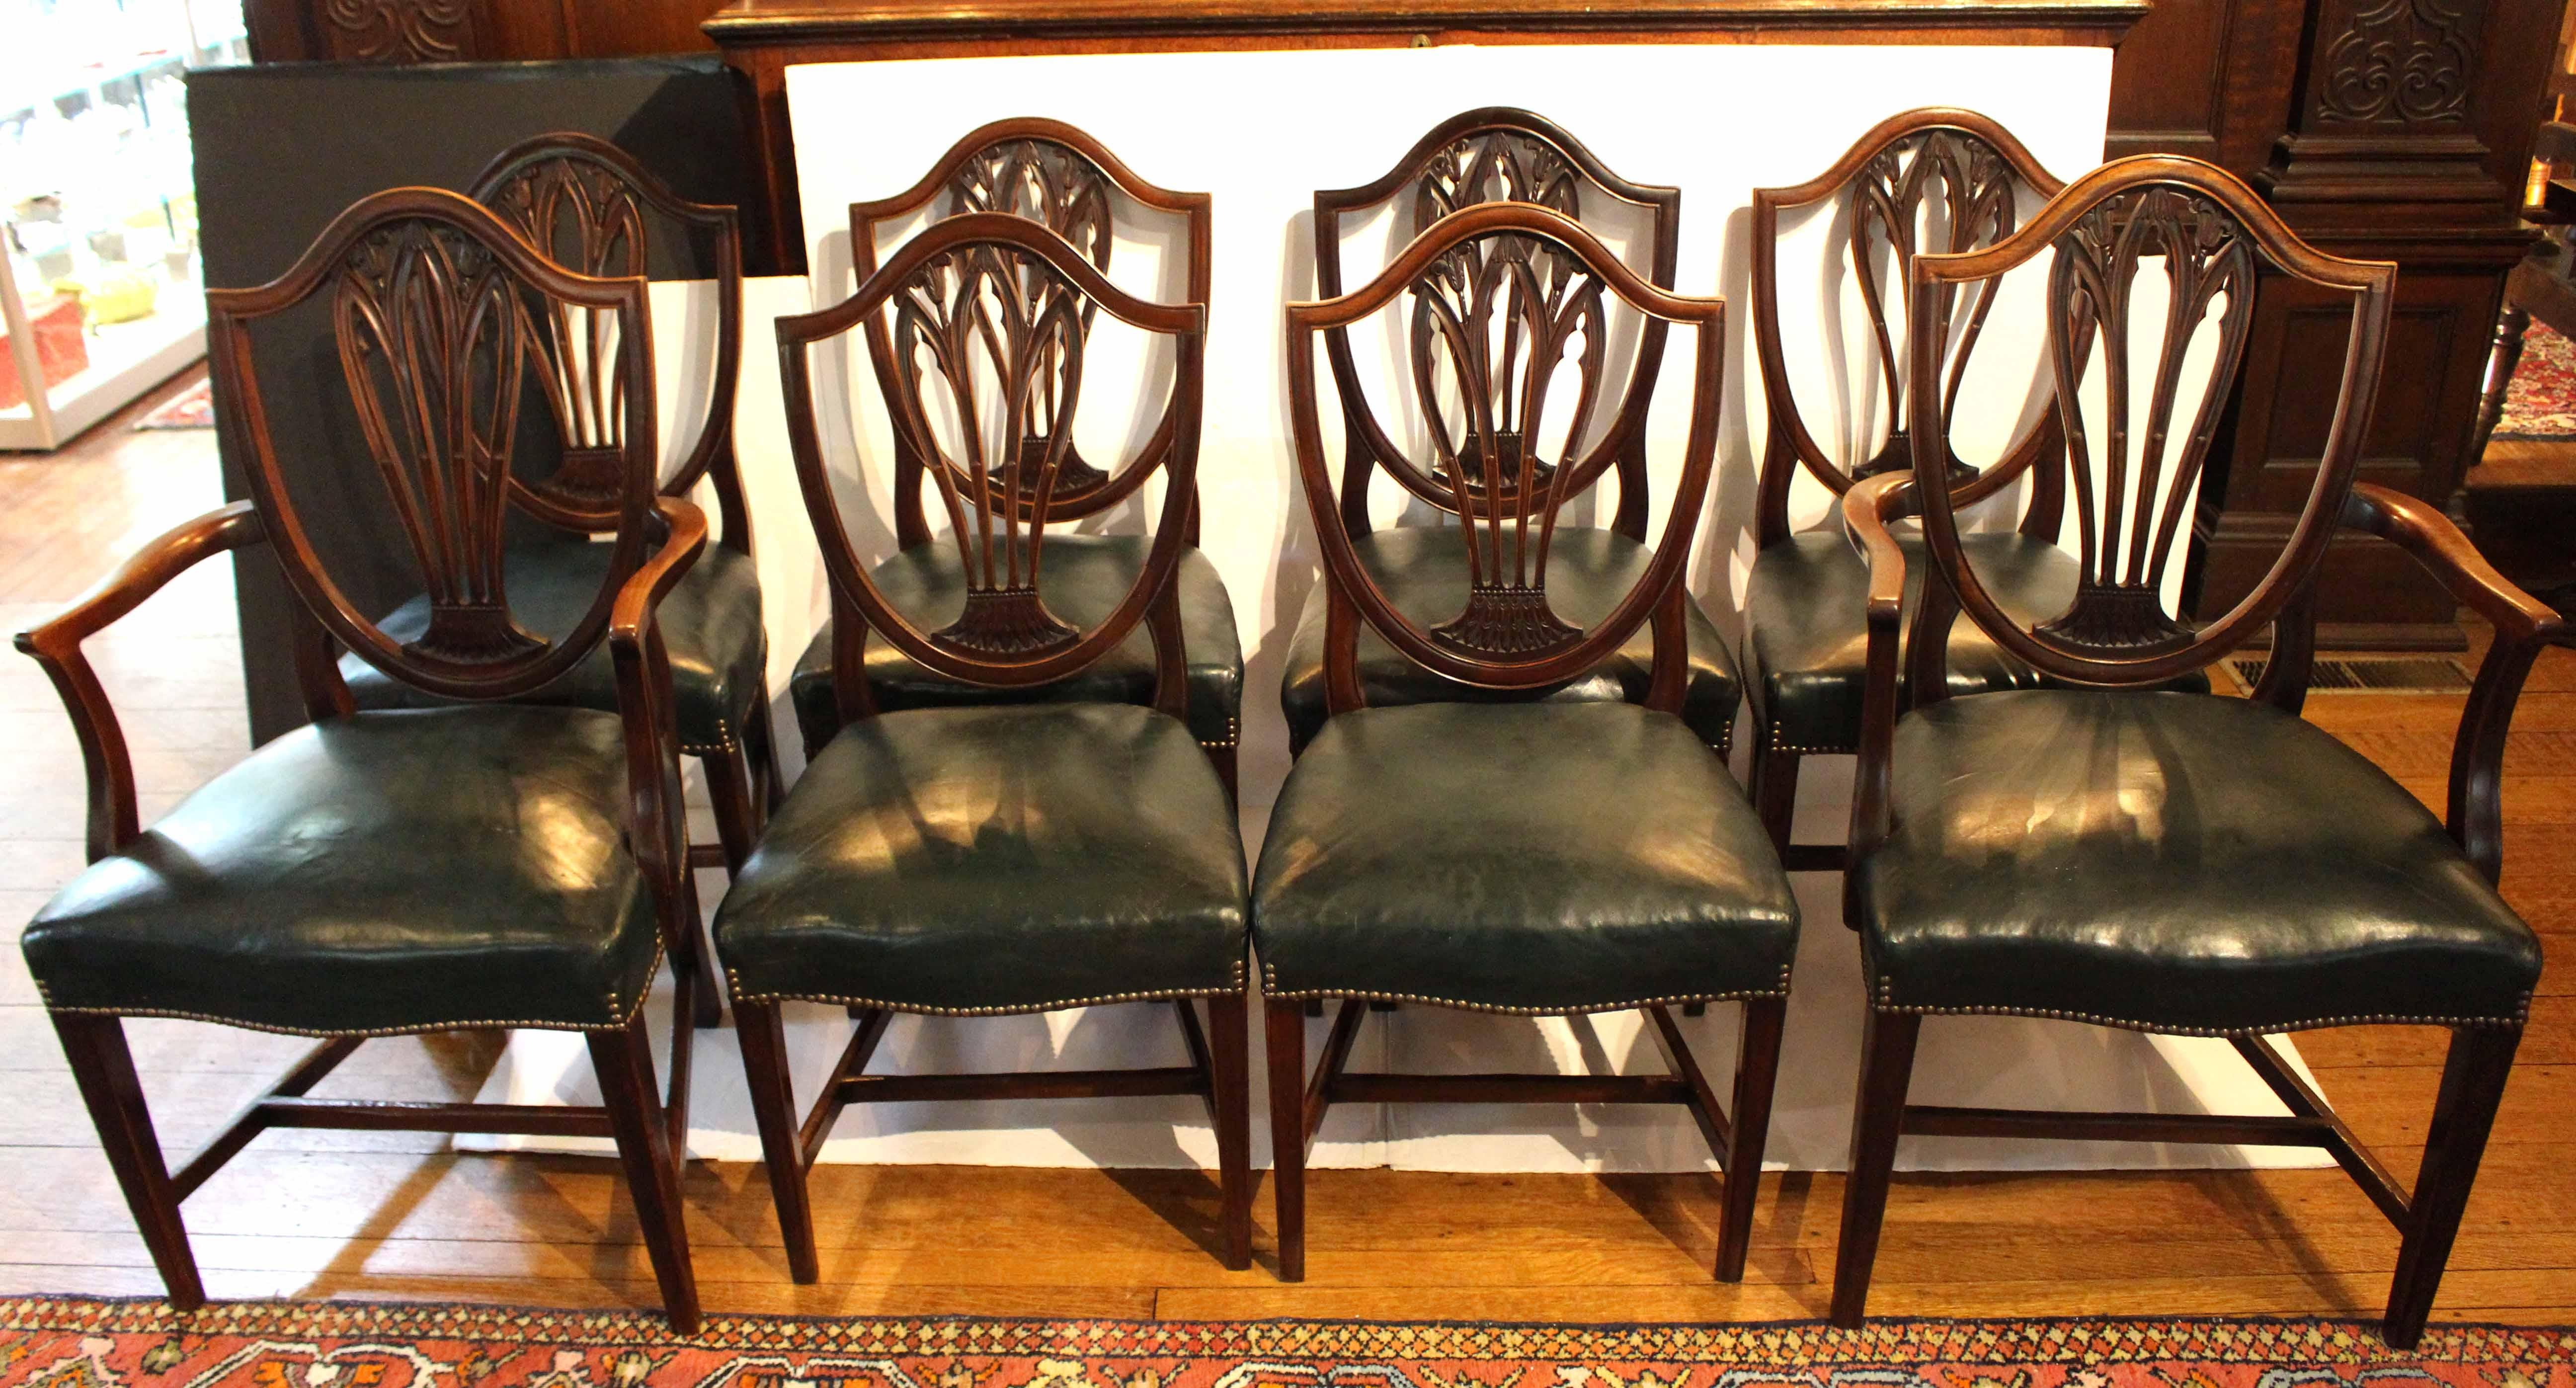 Late 19th century set of 8 Sheraton style dining chairs, English. 2 arms & 6 sides. Well carved acanthus & molded & stop fluted shield backs. Leather upholstered seats, now worn but usable condition. Shaped arms. Straight, tapered, molded legs with